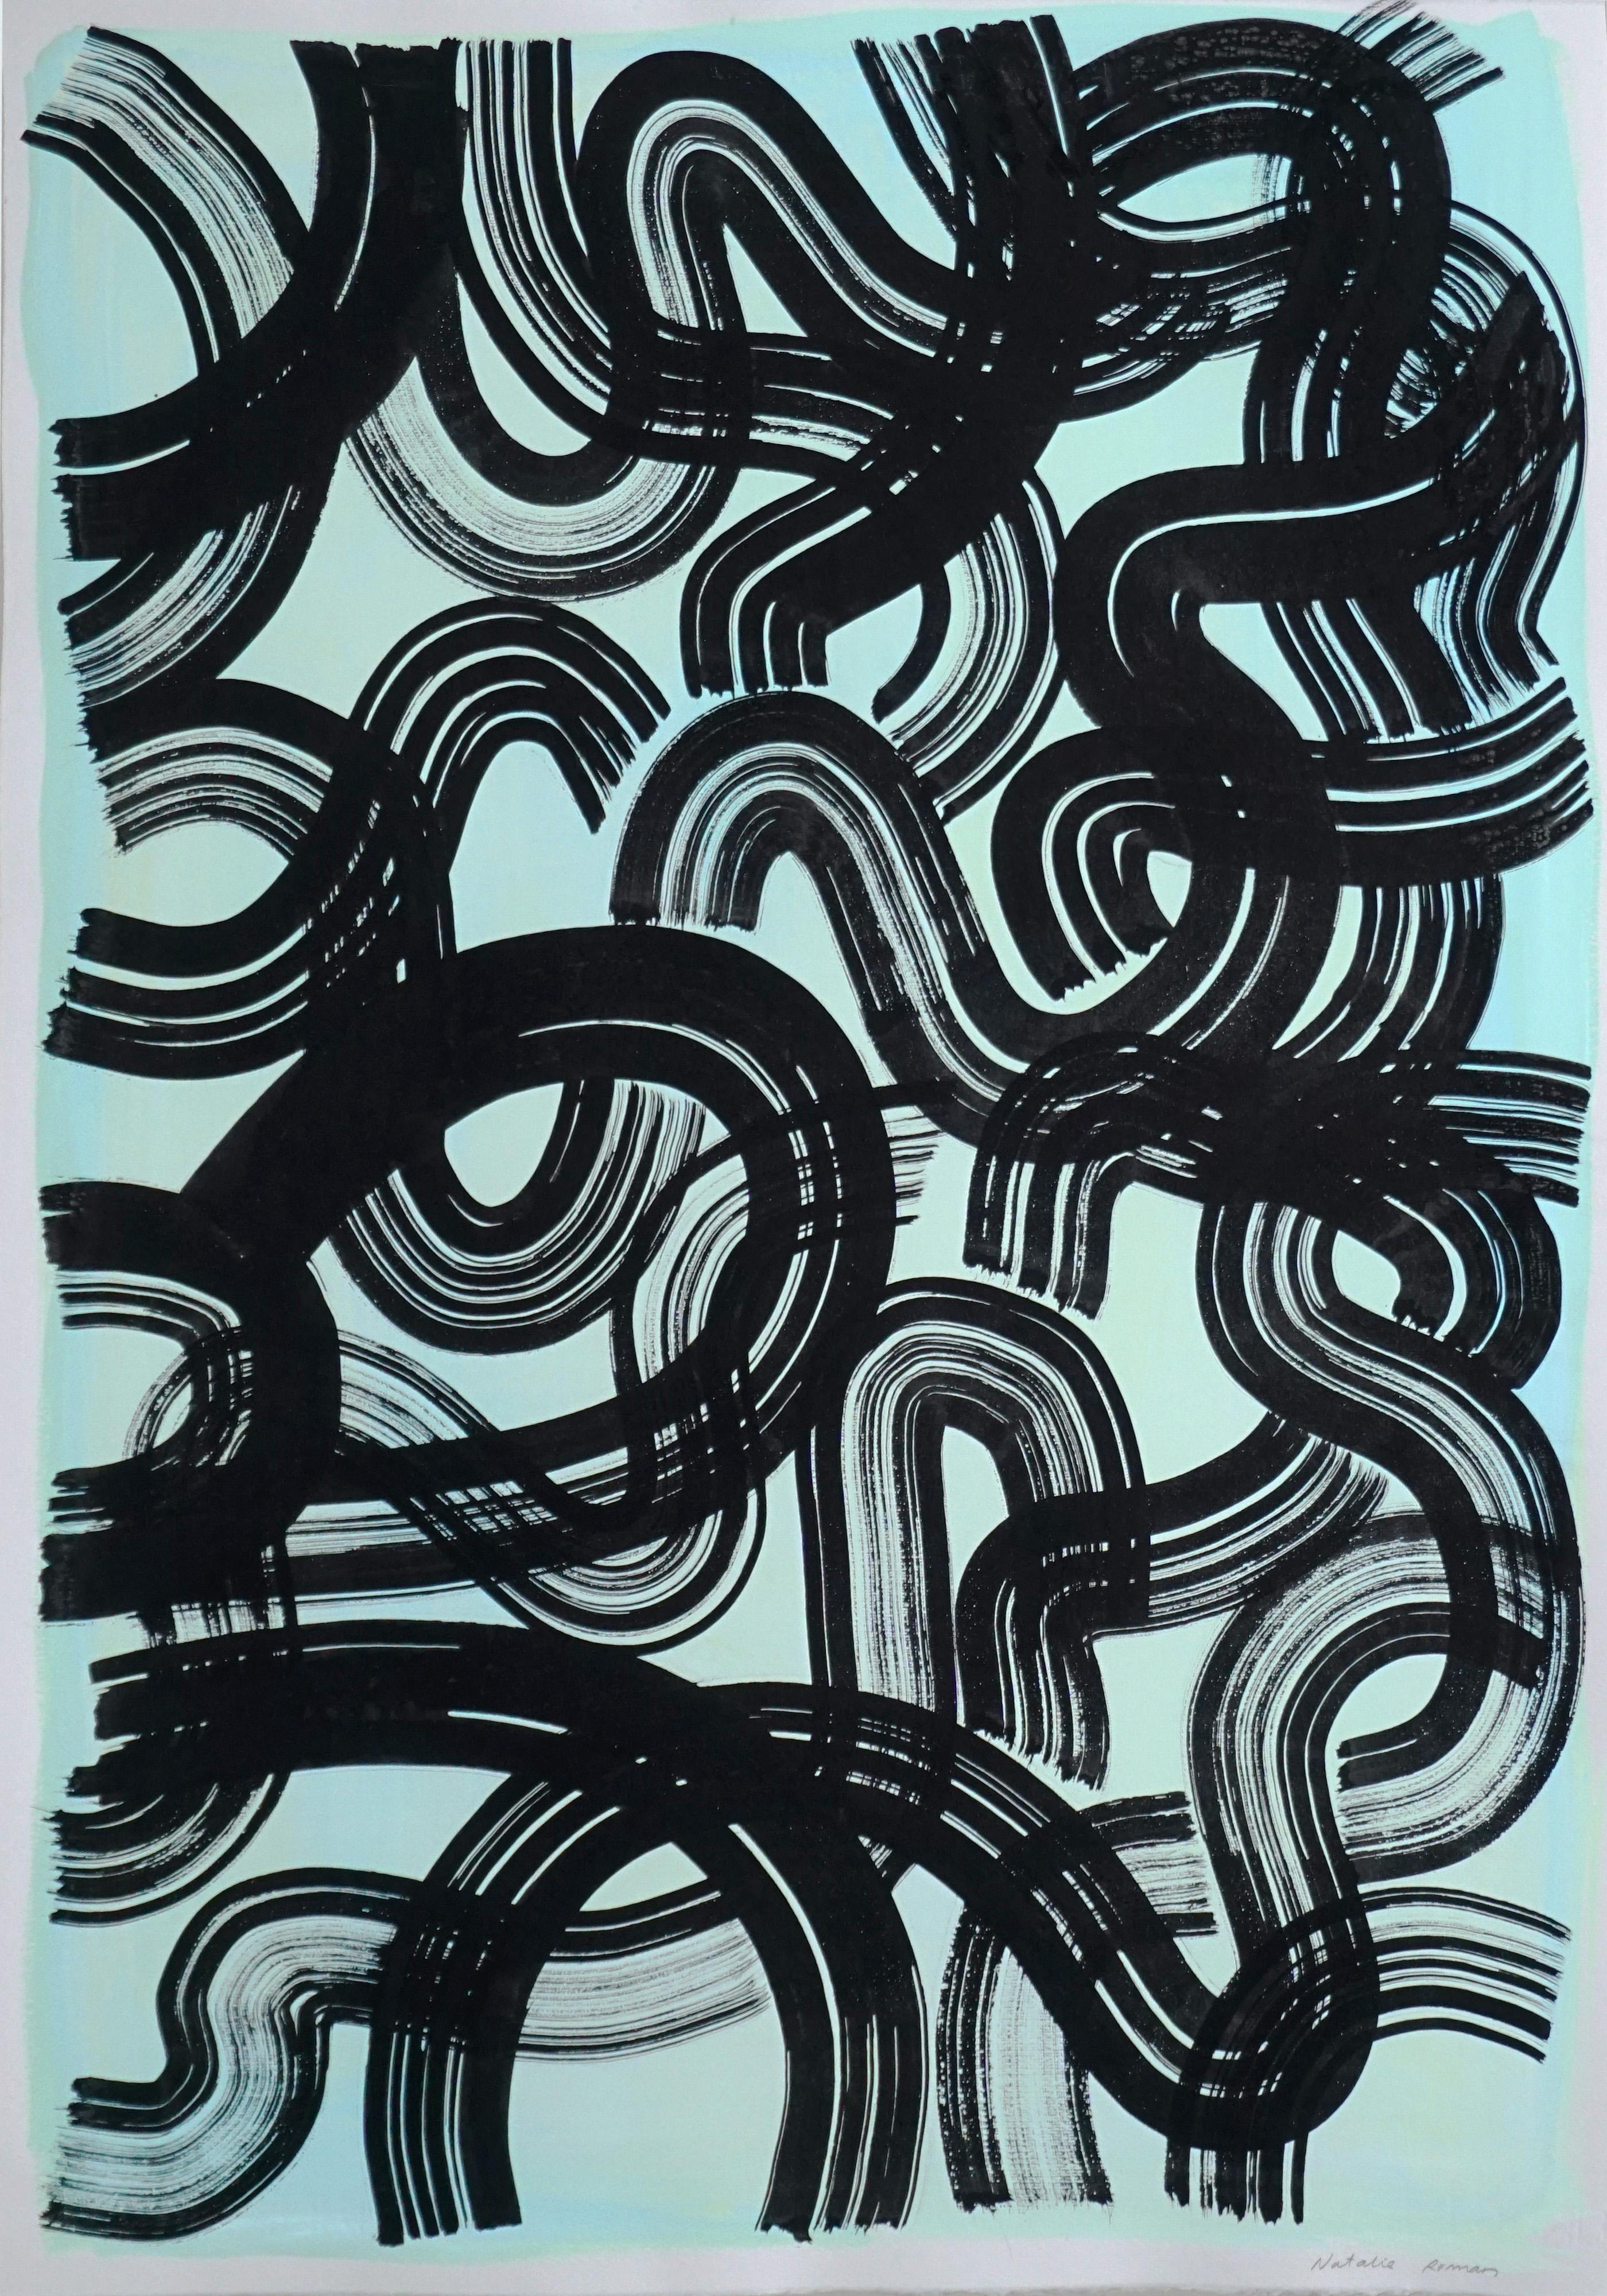 Unknown Abstract Painting - Black Line Work on Pistachio Green, Abstract Brushstrokes Painting on Paper